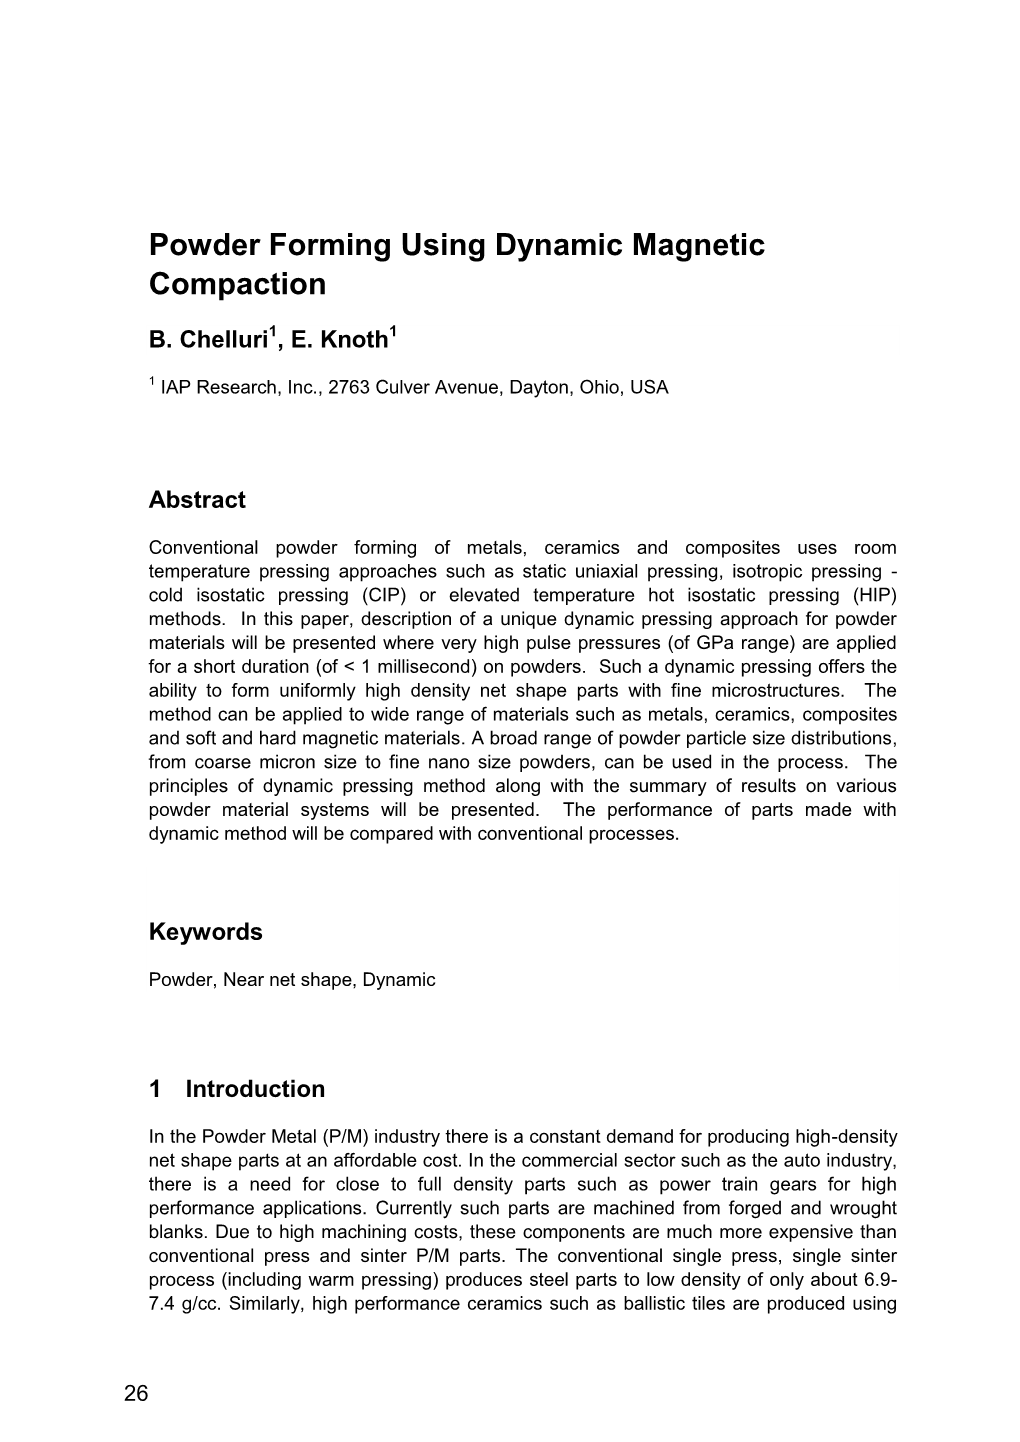 Powder Forming Using Dynamic Magnetic Compaction